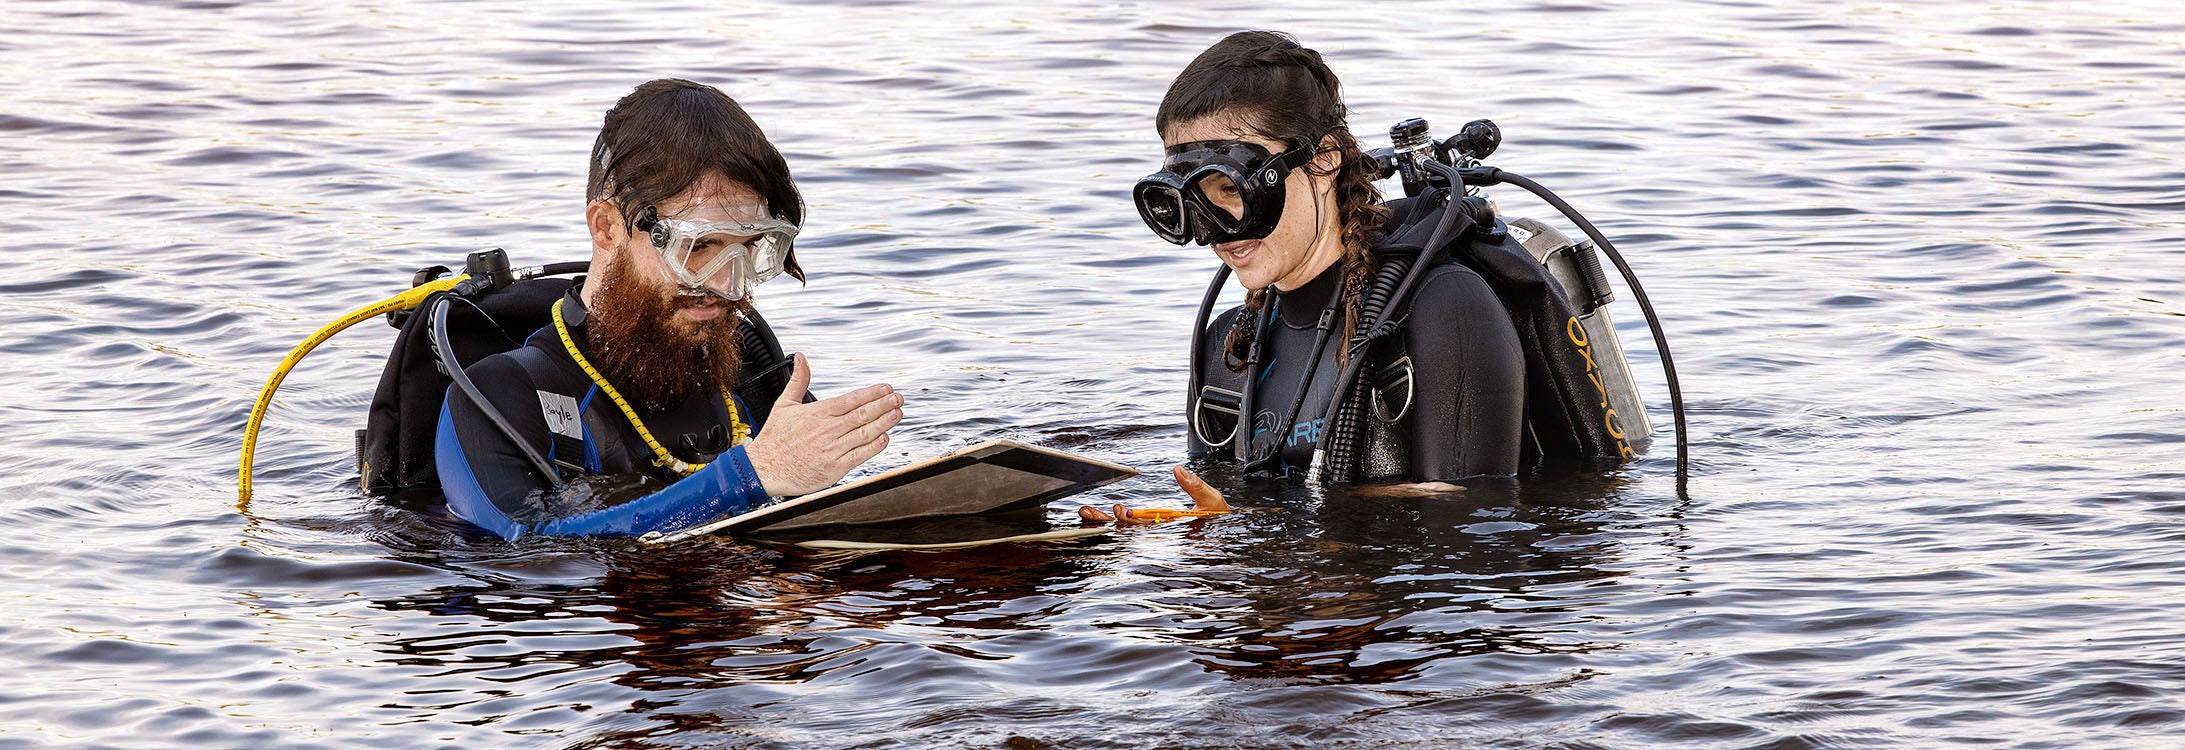 Graduate students Patrick Boyle, left, and Andi Yoxsimer document their research during investigation of the shipwreck in Washington, N.C. (Photo by Rhett Butler)
